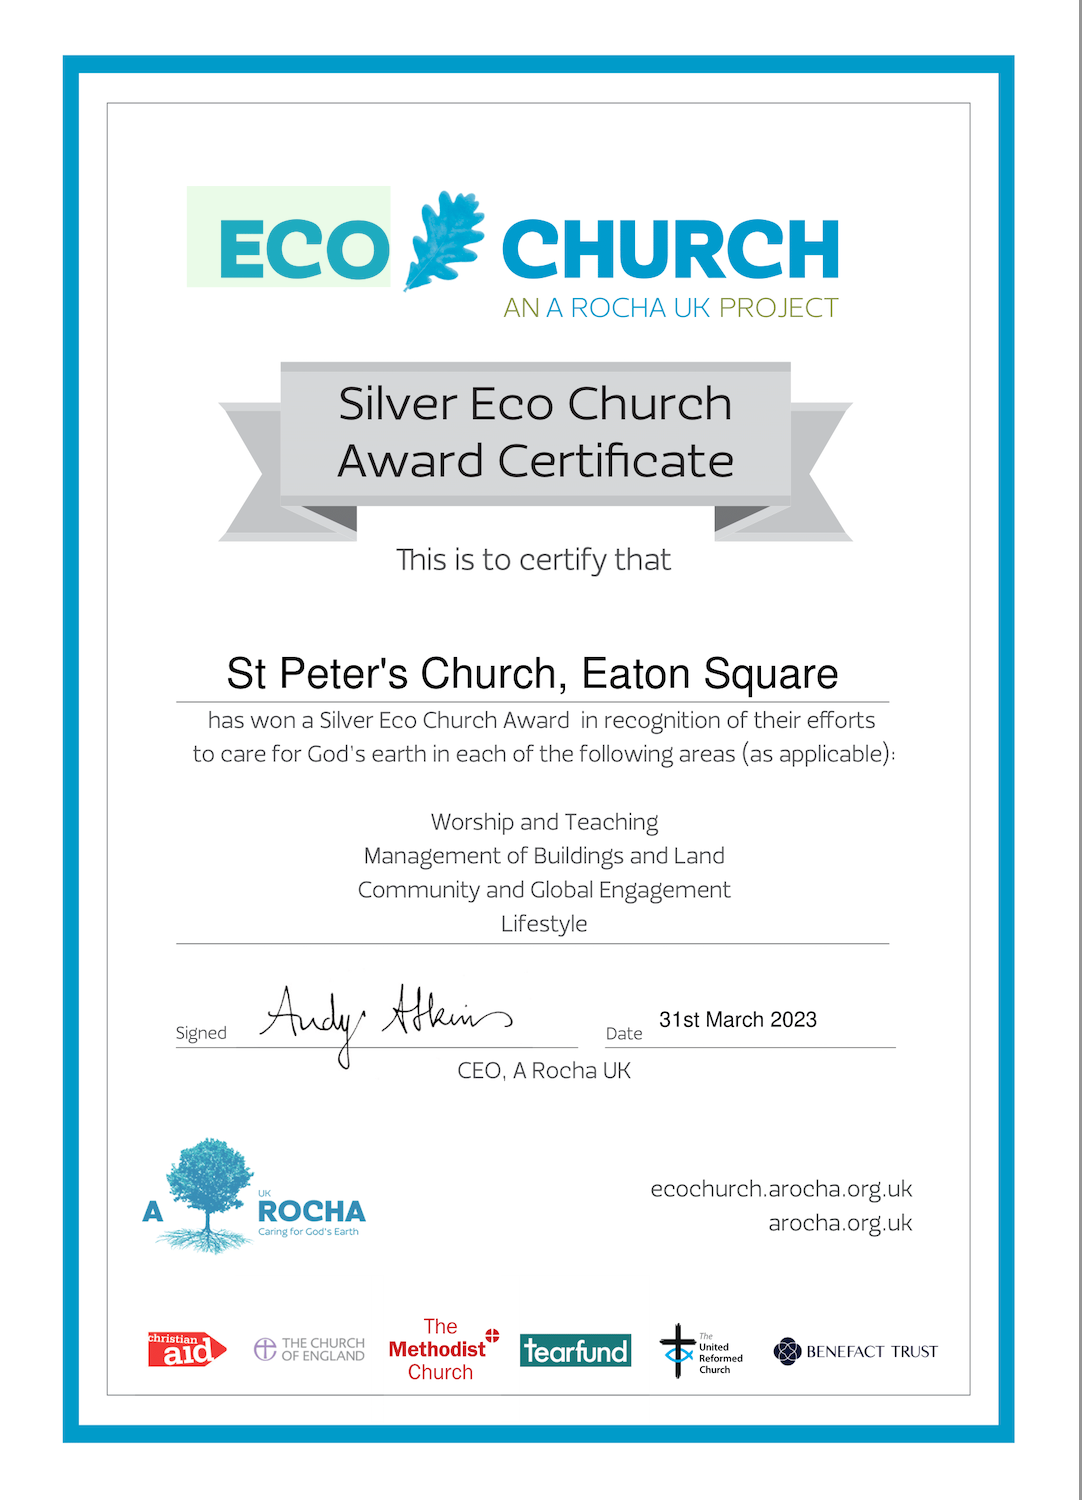 St Peter's earns a silver award!